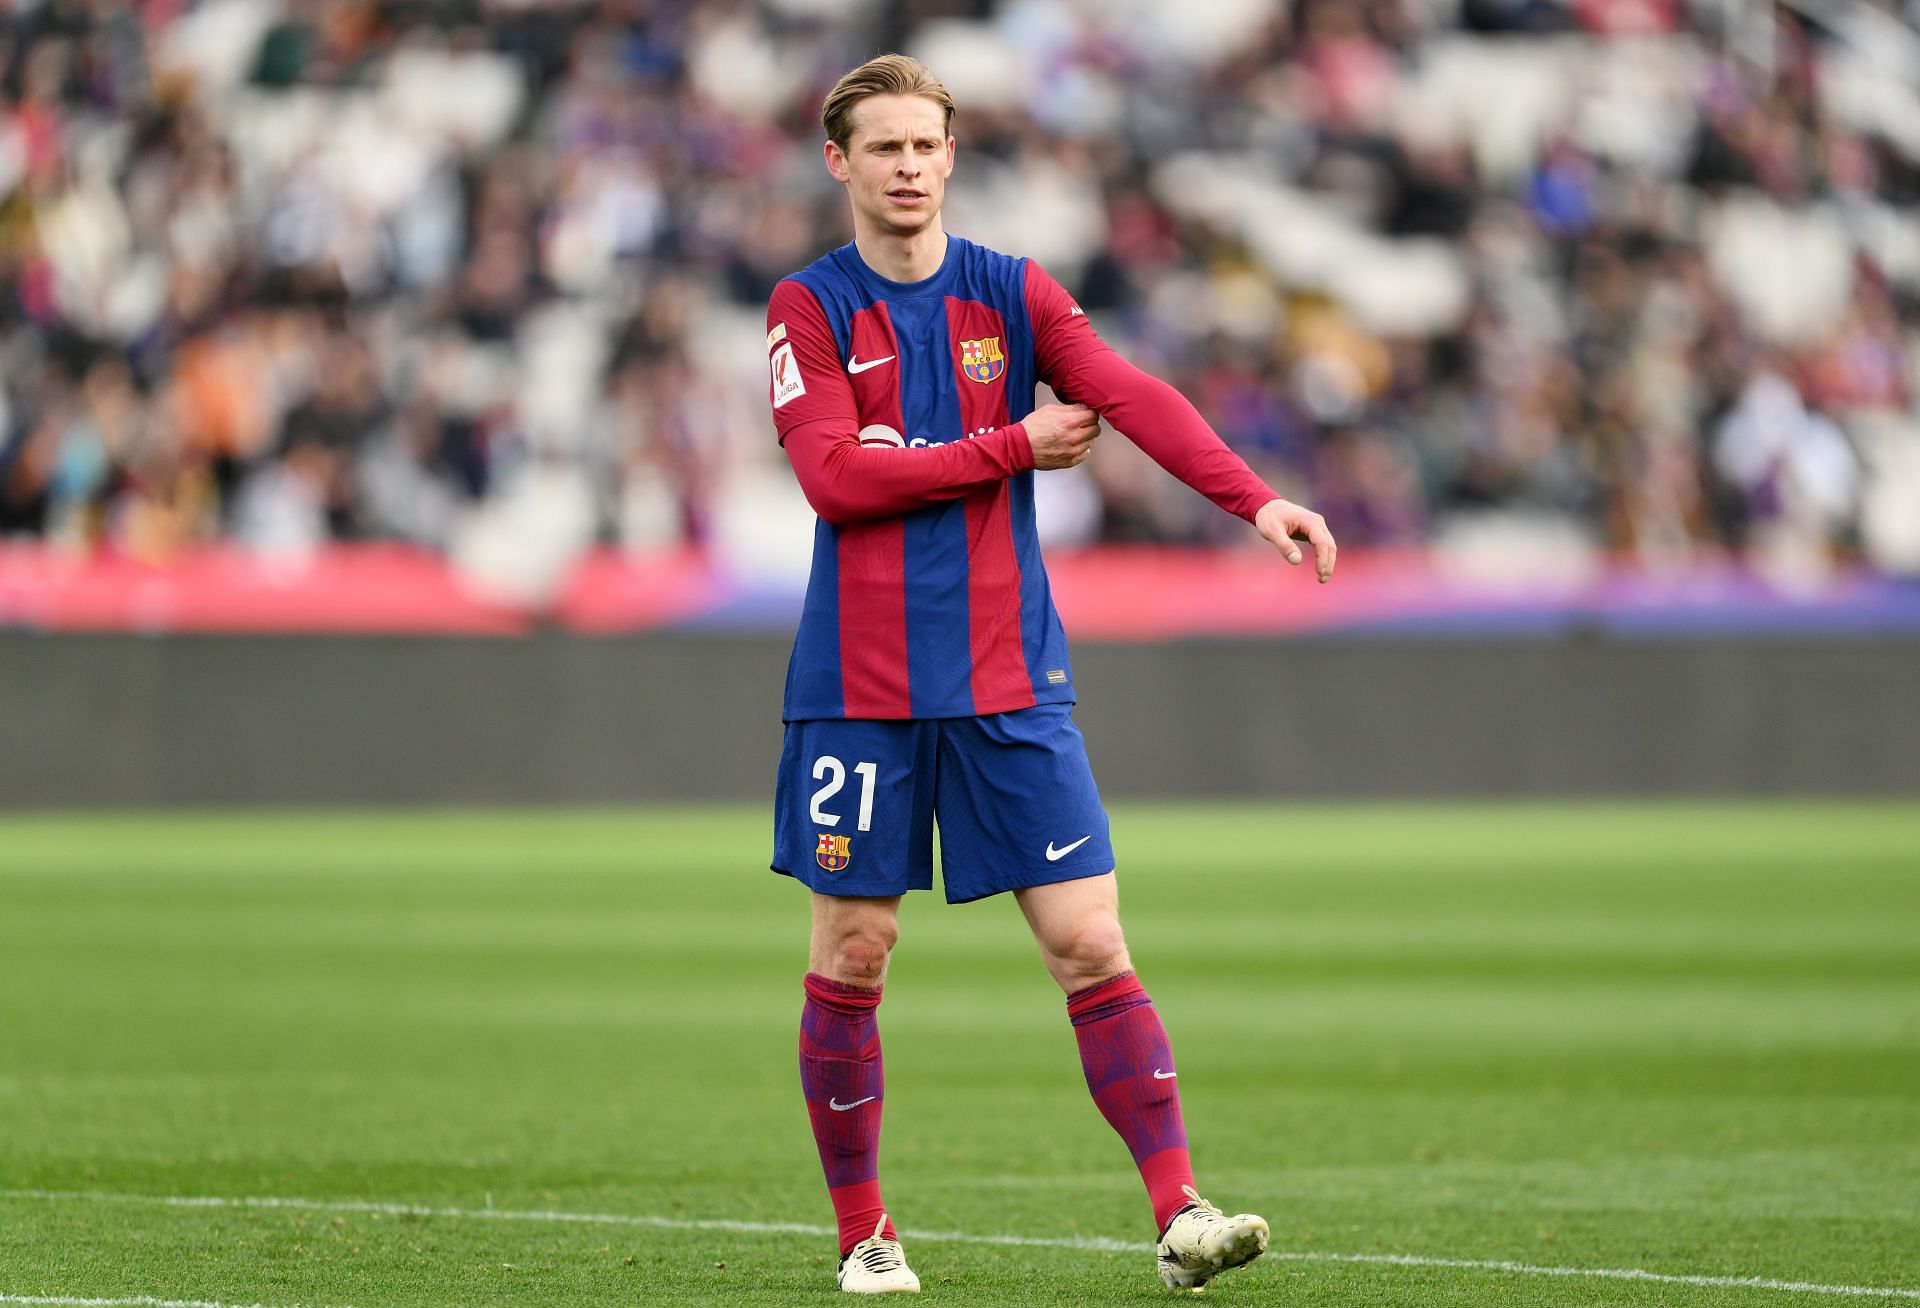 Frenkie de Jong&rsquo;s future remains up in the air